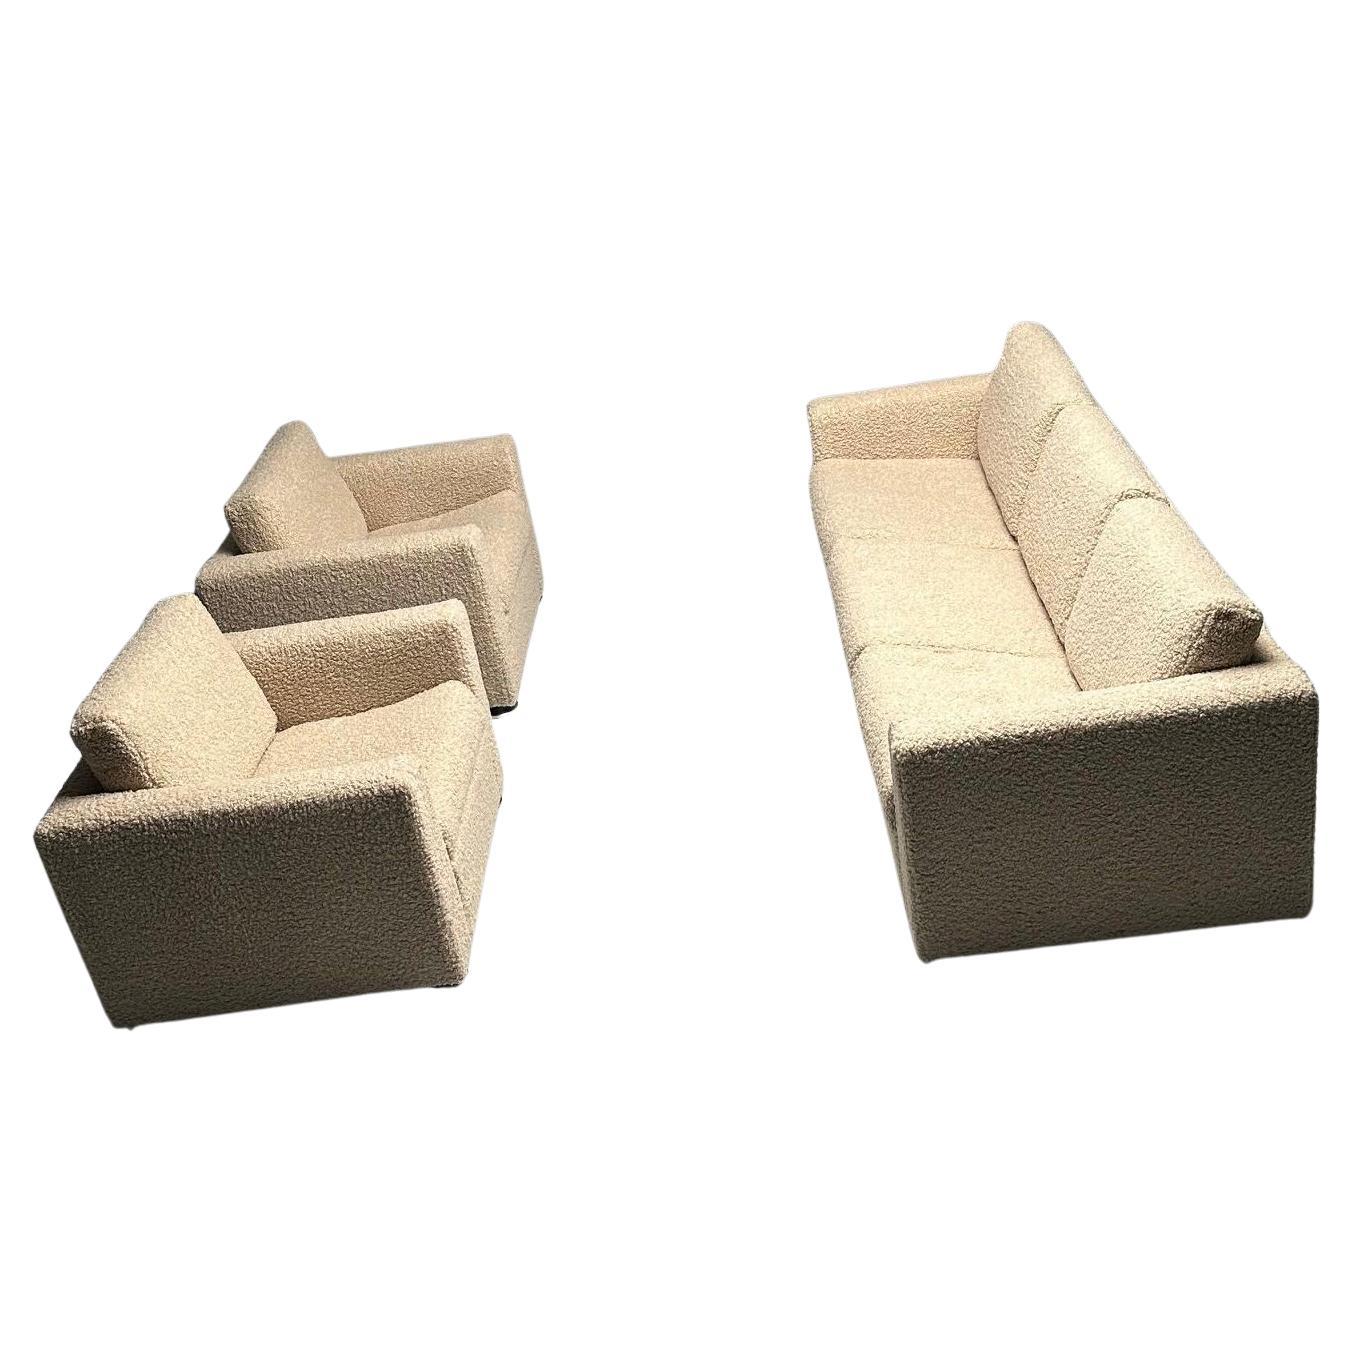 Stendig Living Room, Sofa, Pair of Cube Chairs, New Boucle, Switzerland, Labeled